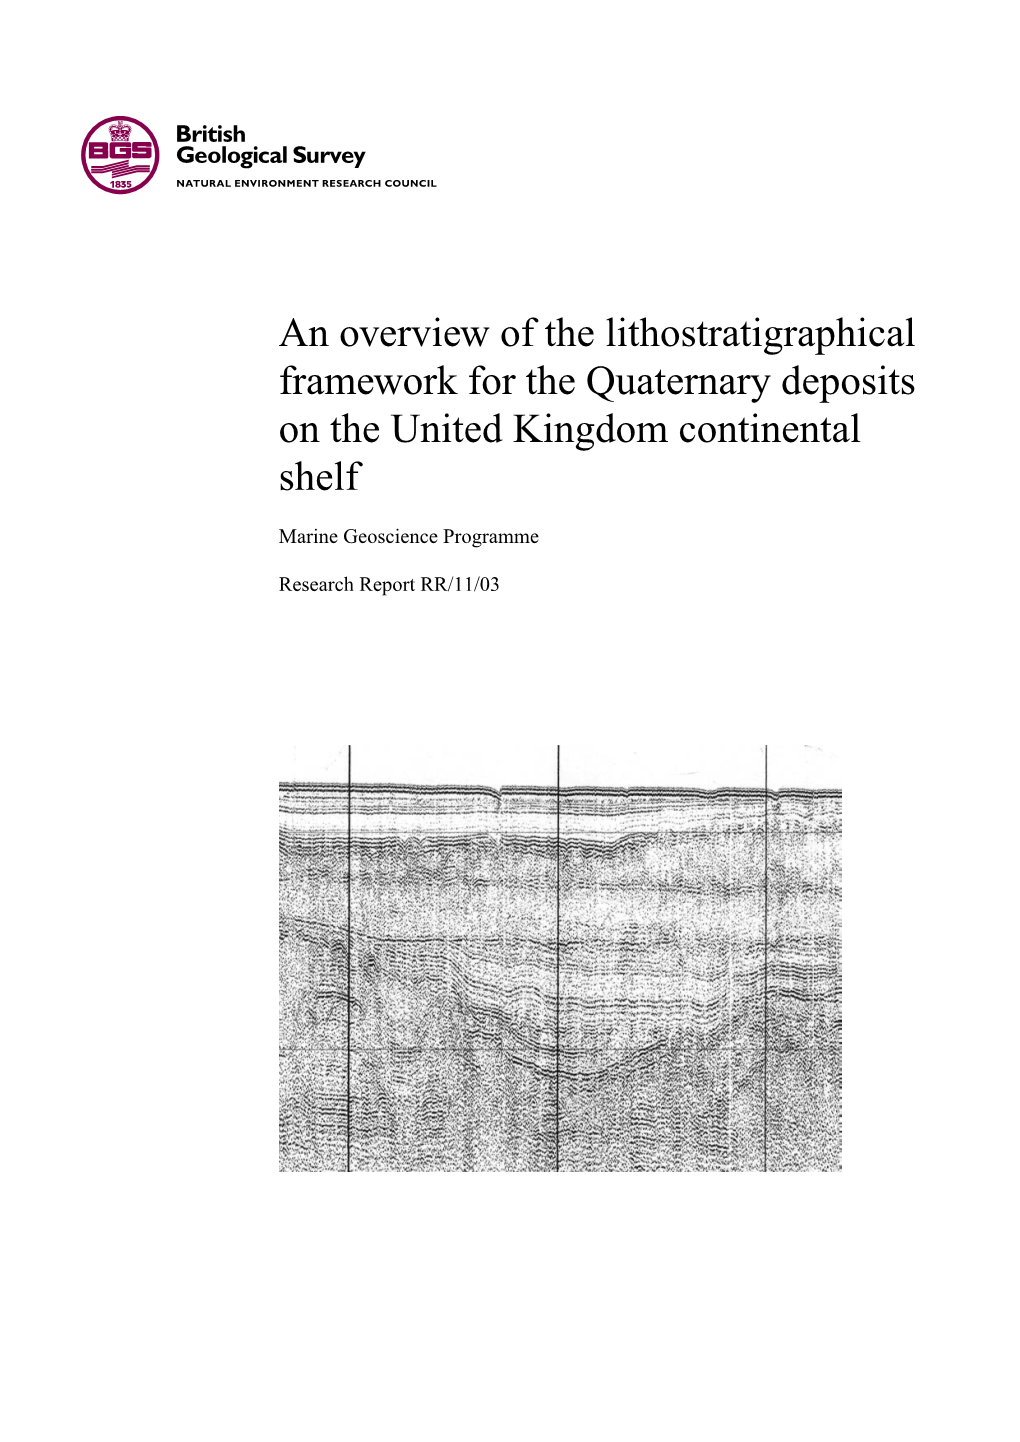 An Overview of the Lithostratigraphical Framework for the Quaternary Deposits on the United Kingdom Continental Shelf